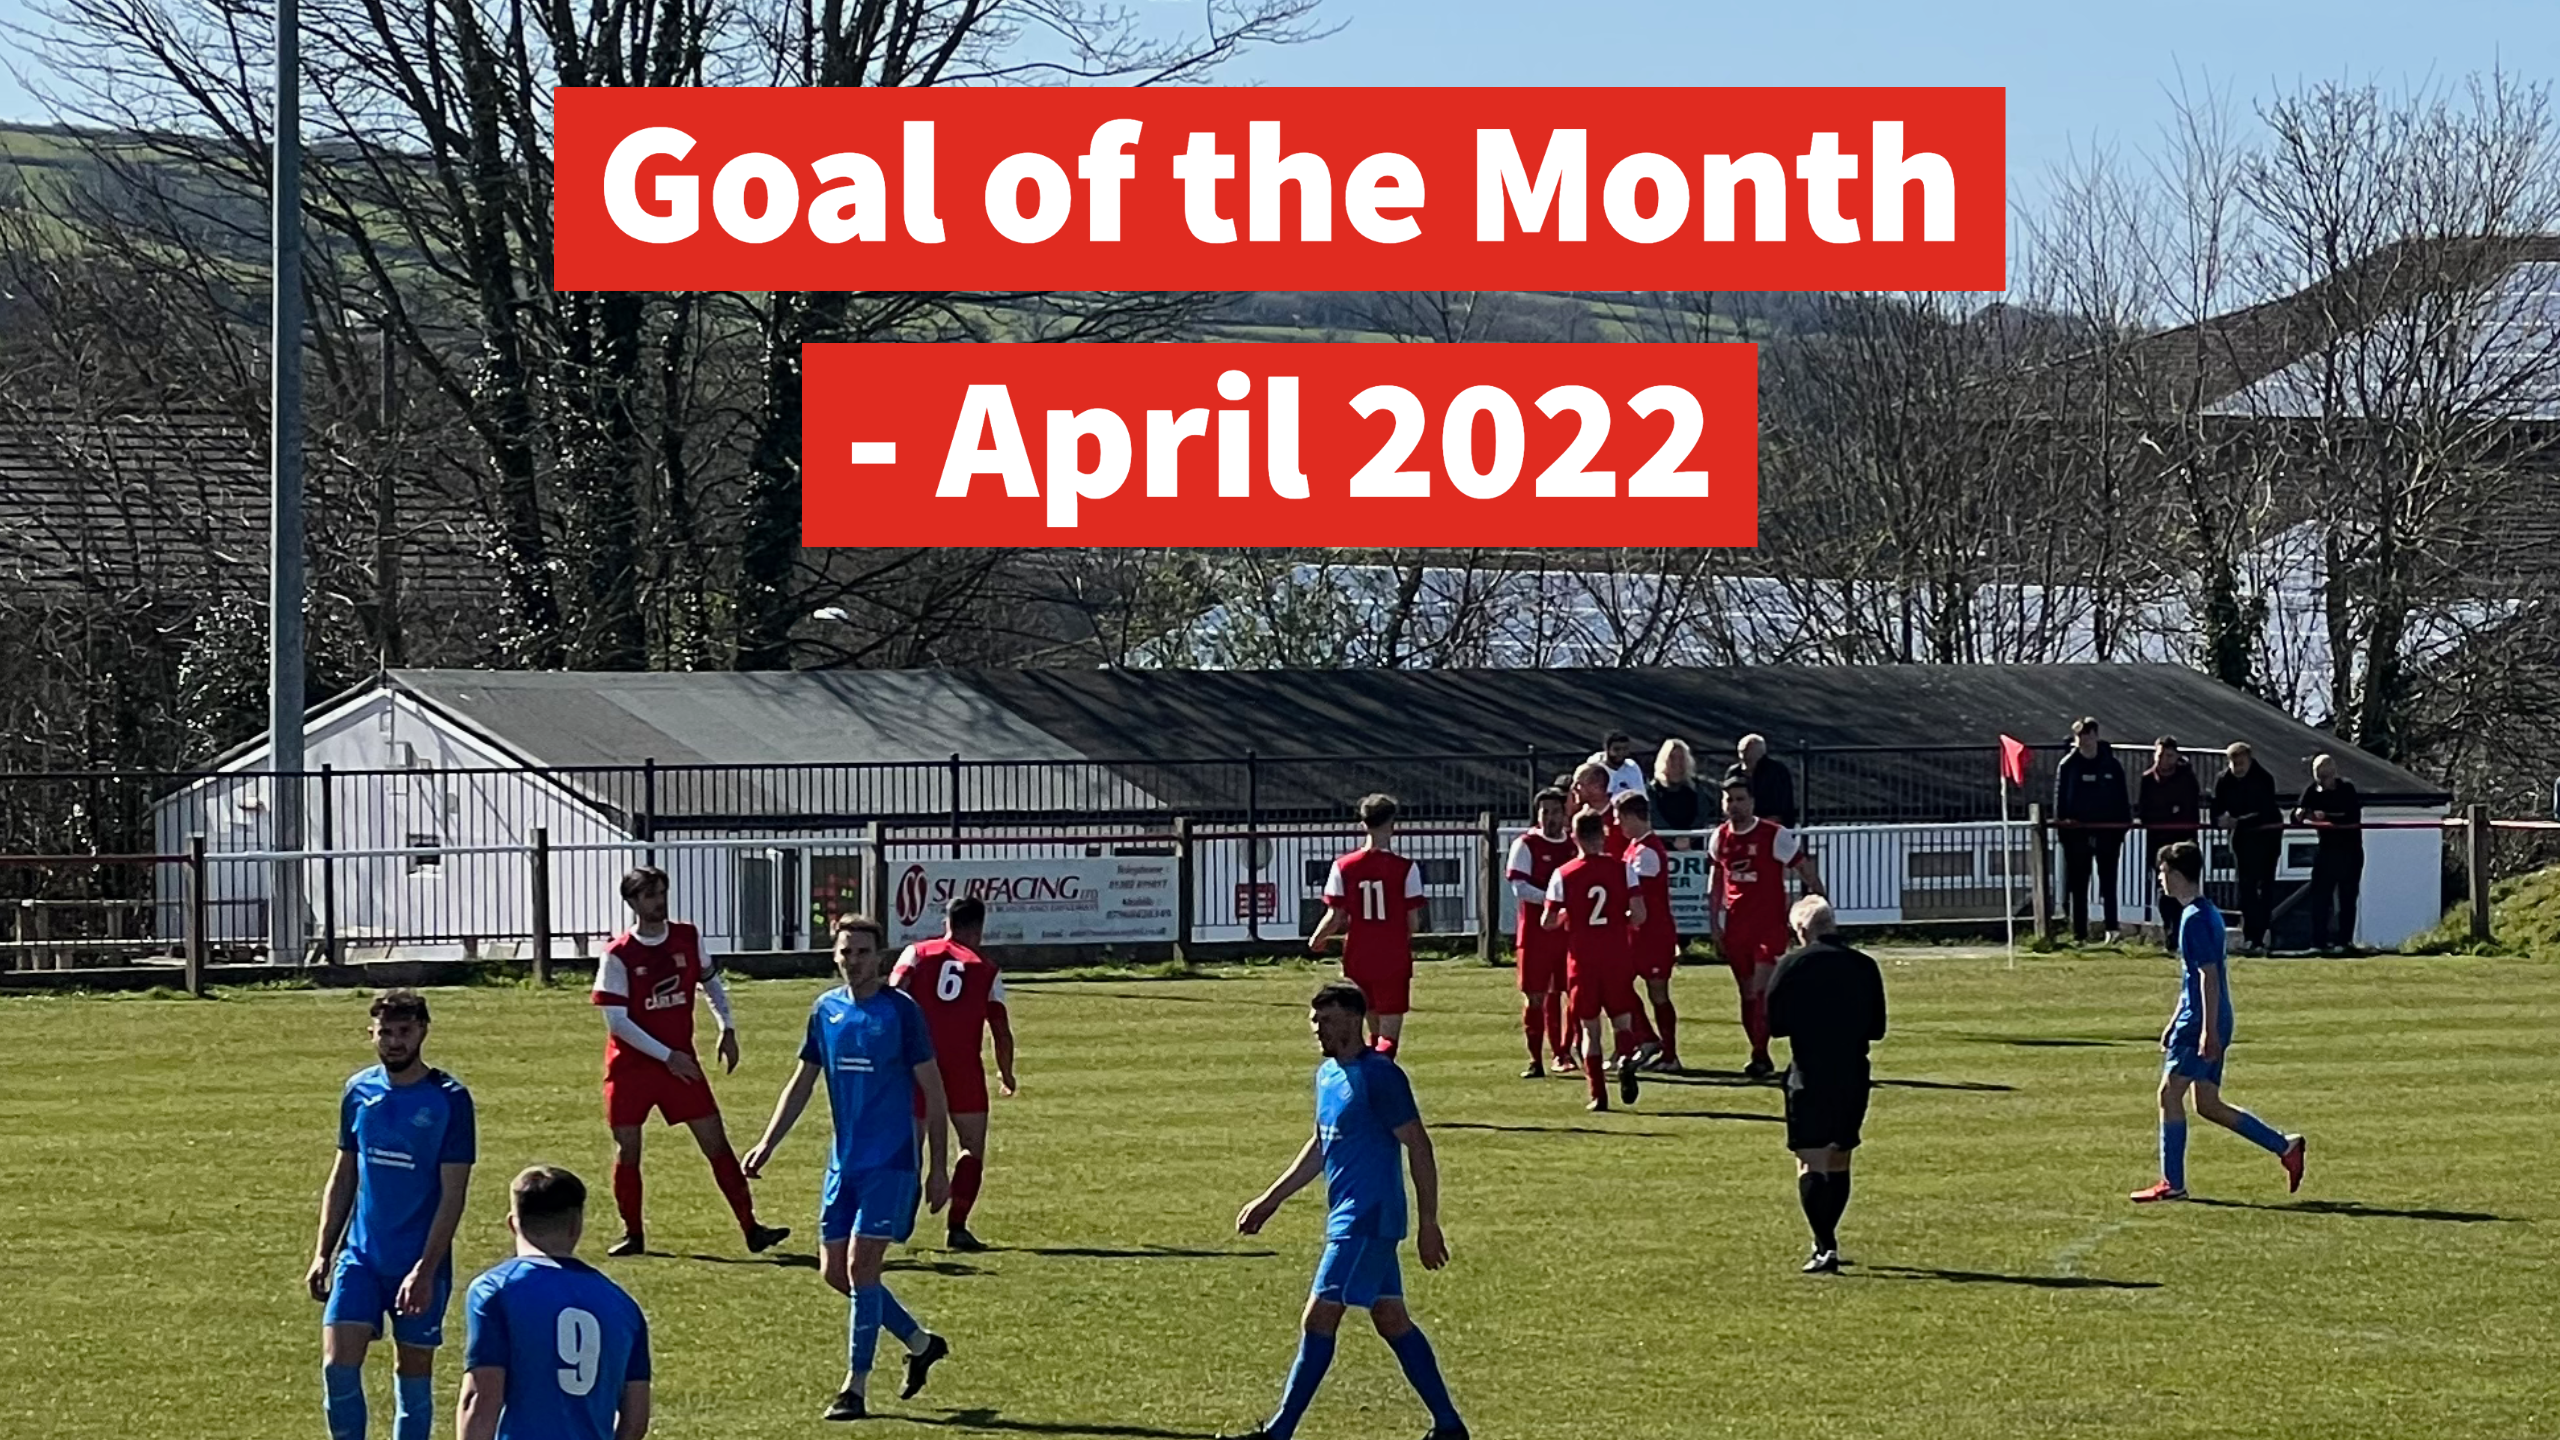 Goal of the Month - April 2022